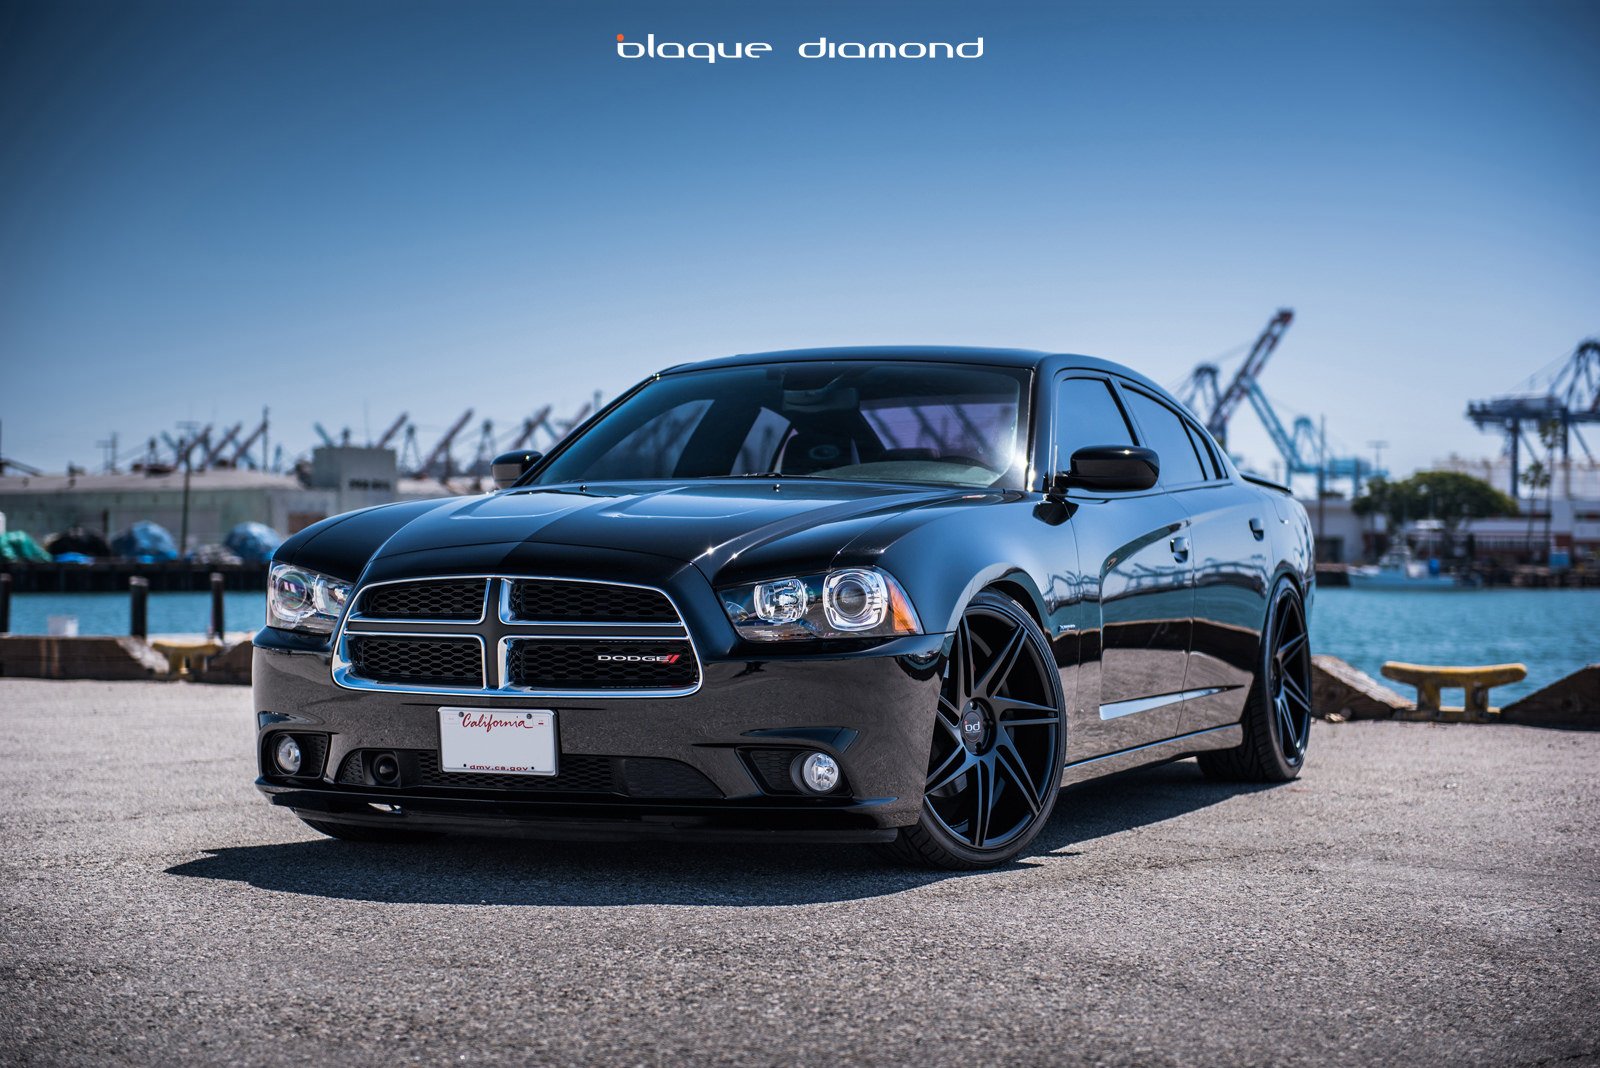 dodge, Charger rt, Cars Wallpaper